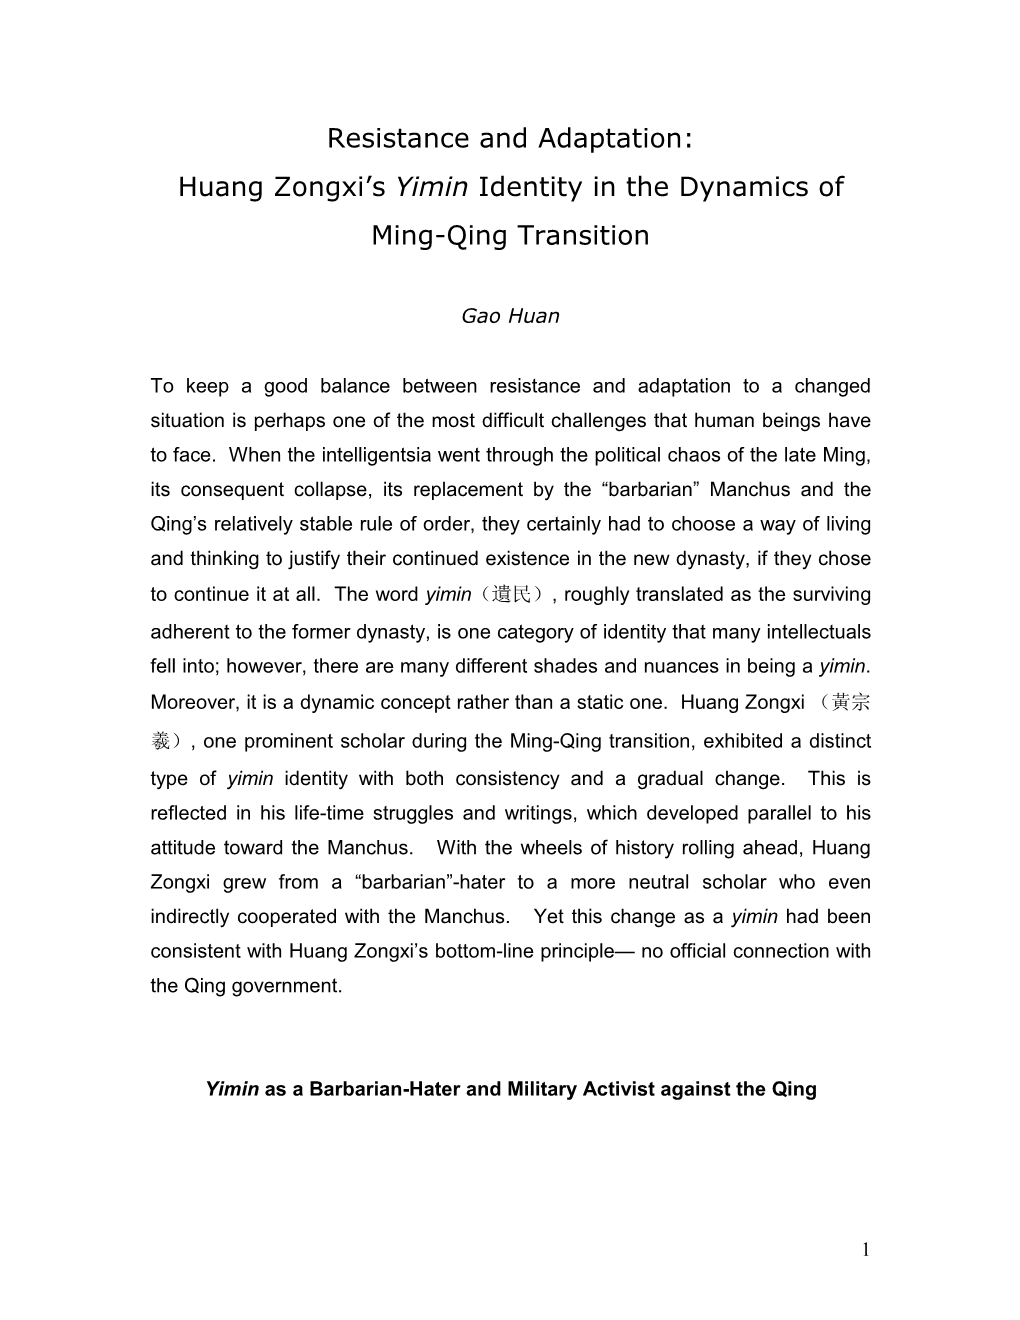 Huang Zongxi's Yimin Identity in the Dynamics of Ming-Qing Transition